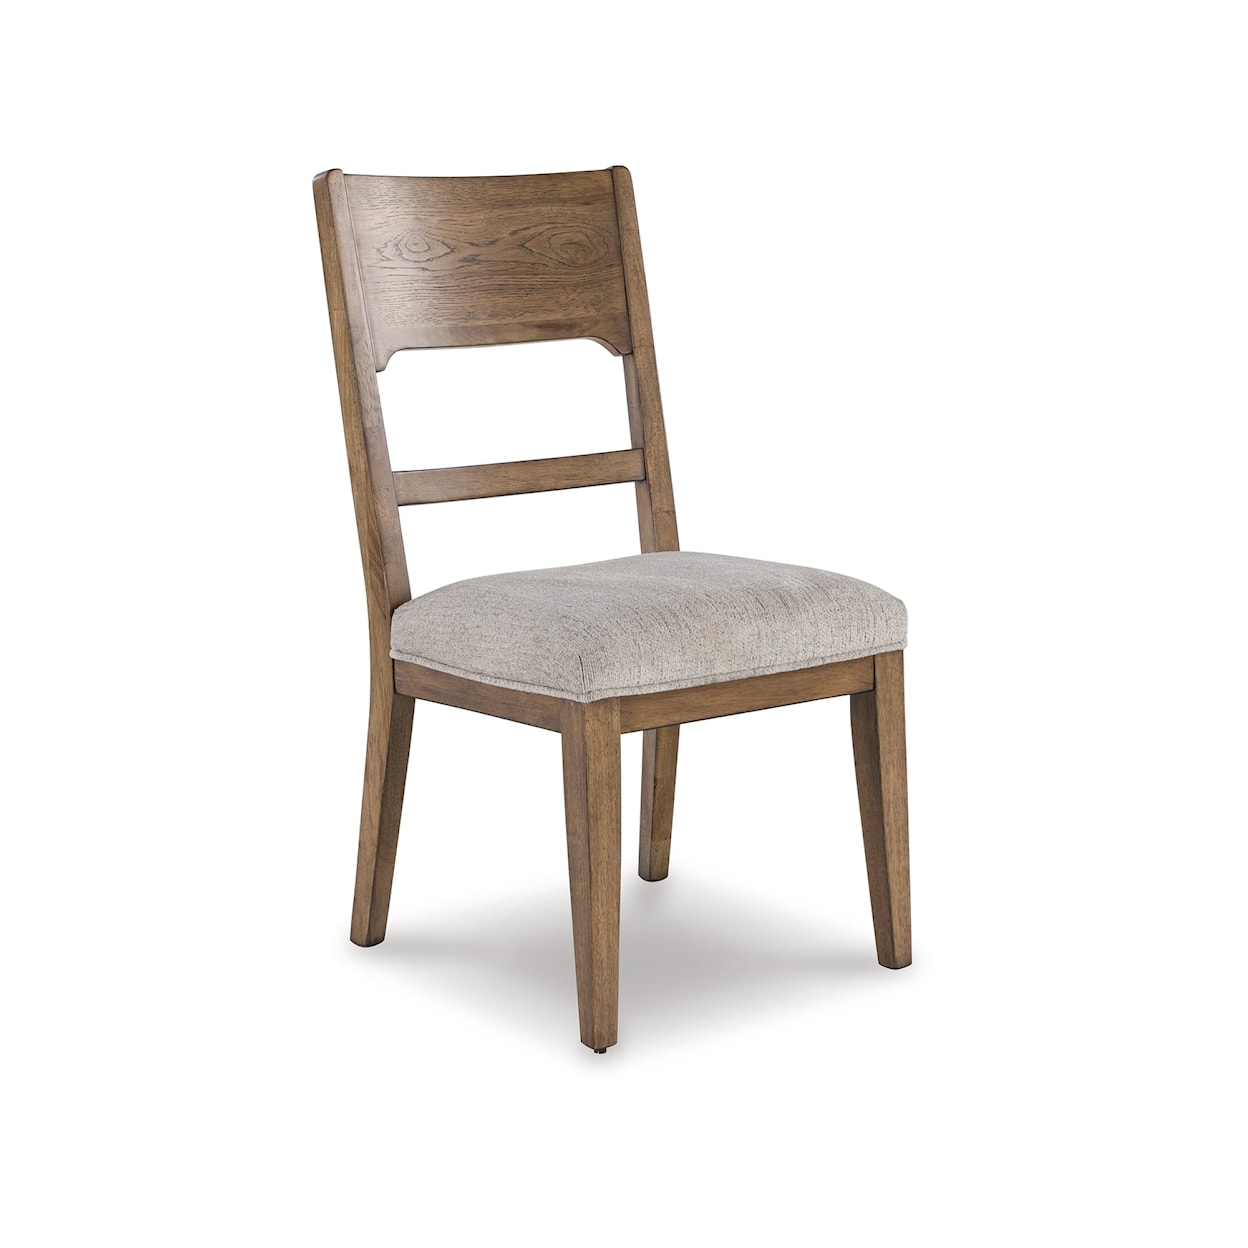 Signature Design by Ashley Clinton Dining Side Chair